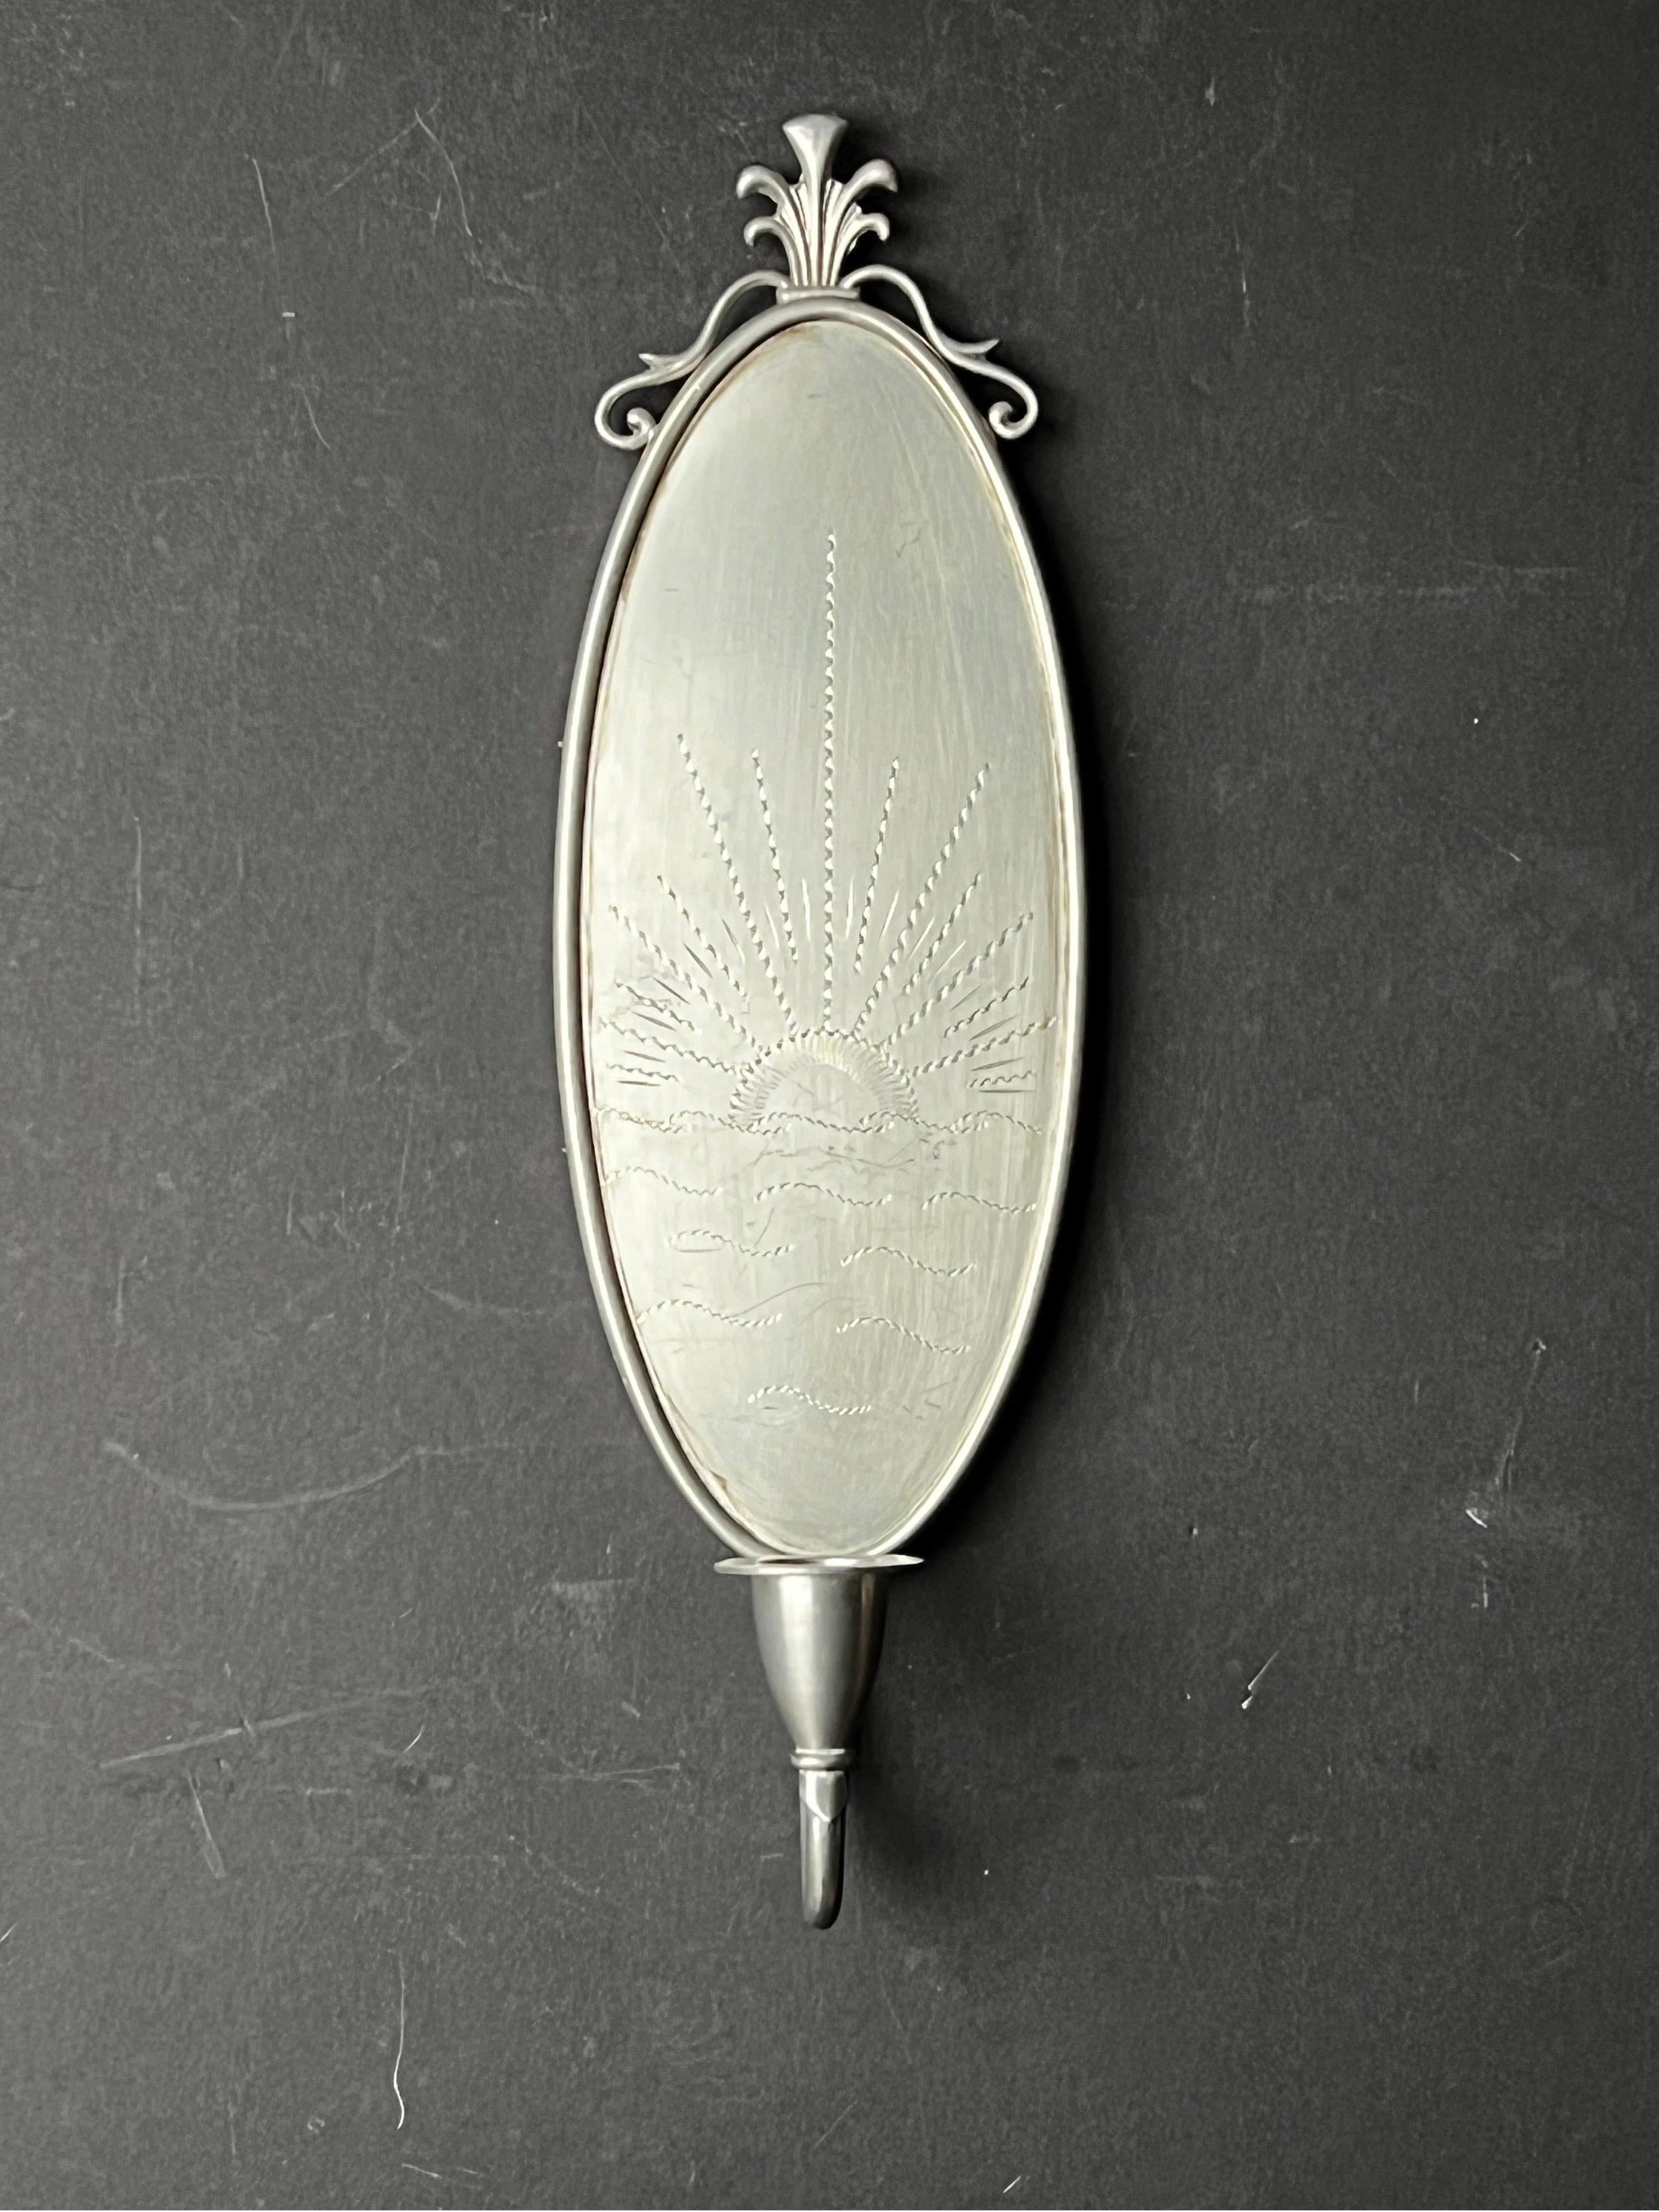 An oval candle sconce in silver-coloured metal - mostly likely pewter. The oval panel is engraved with a simple design of a sunrise (or sunset) over the sea. The wooden back has a single hanging point which is stamped 